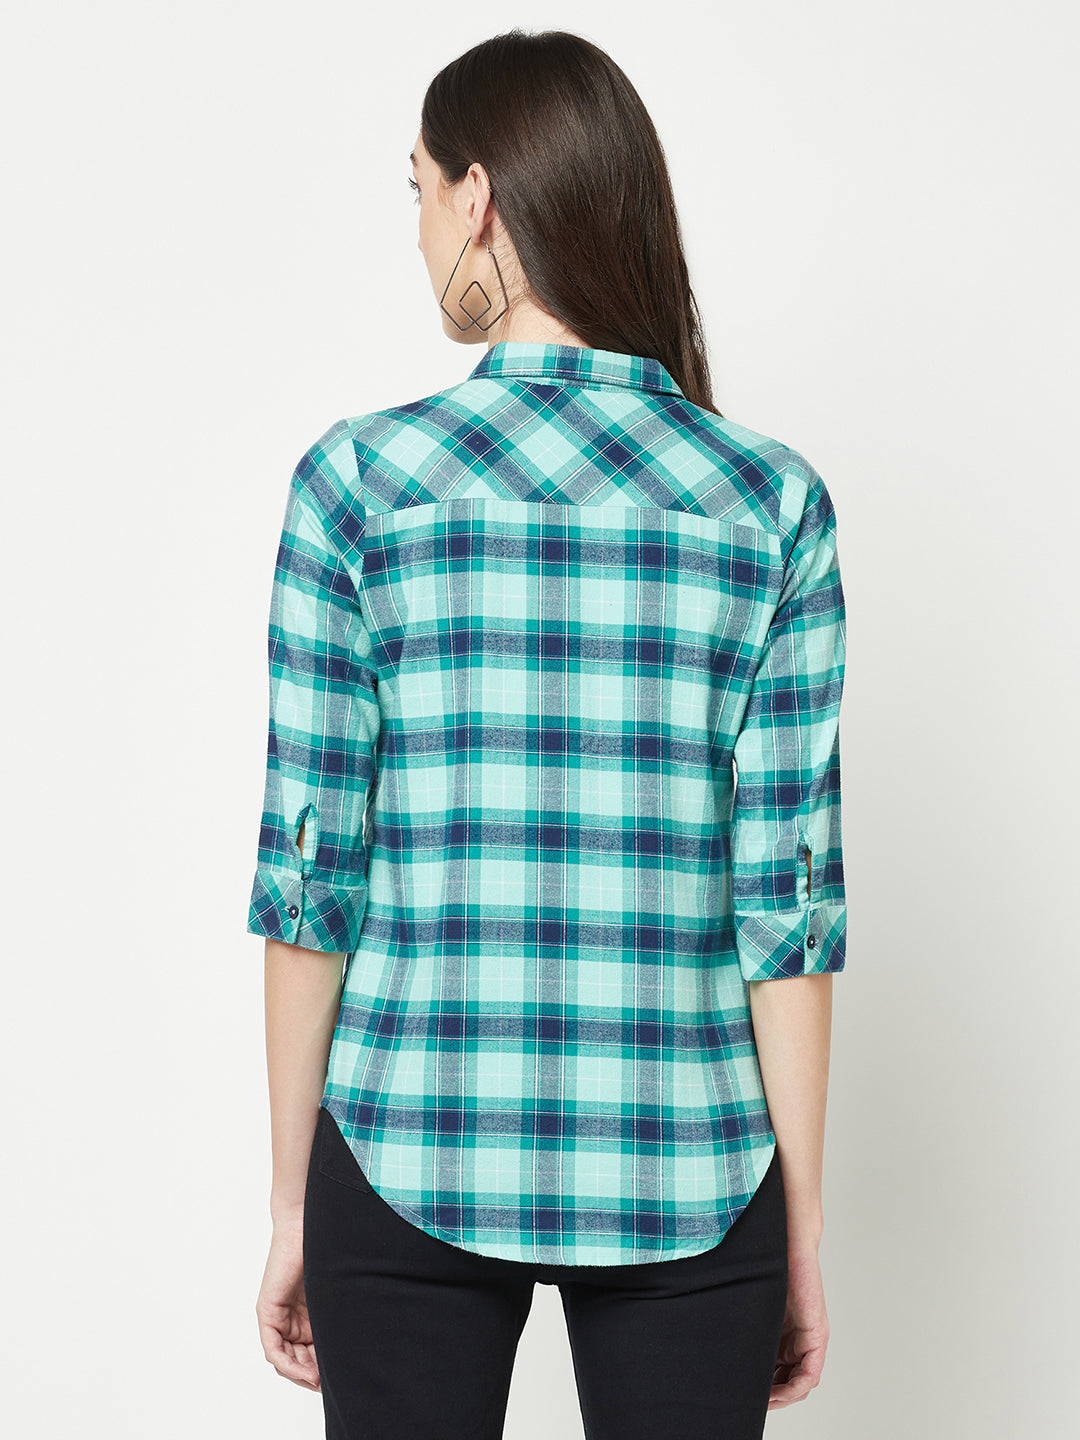  Turquoise Checked Shirt